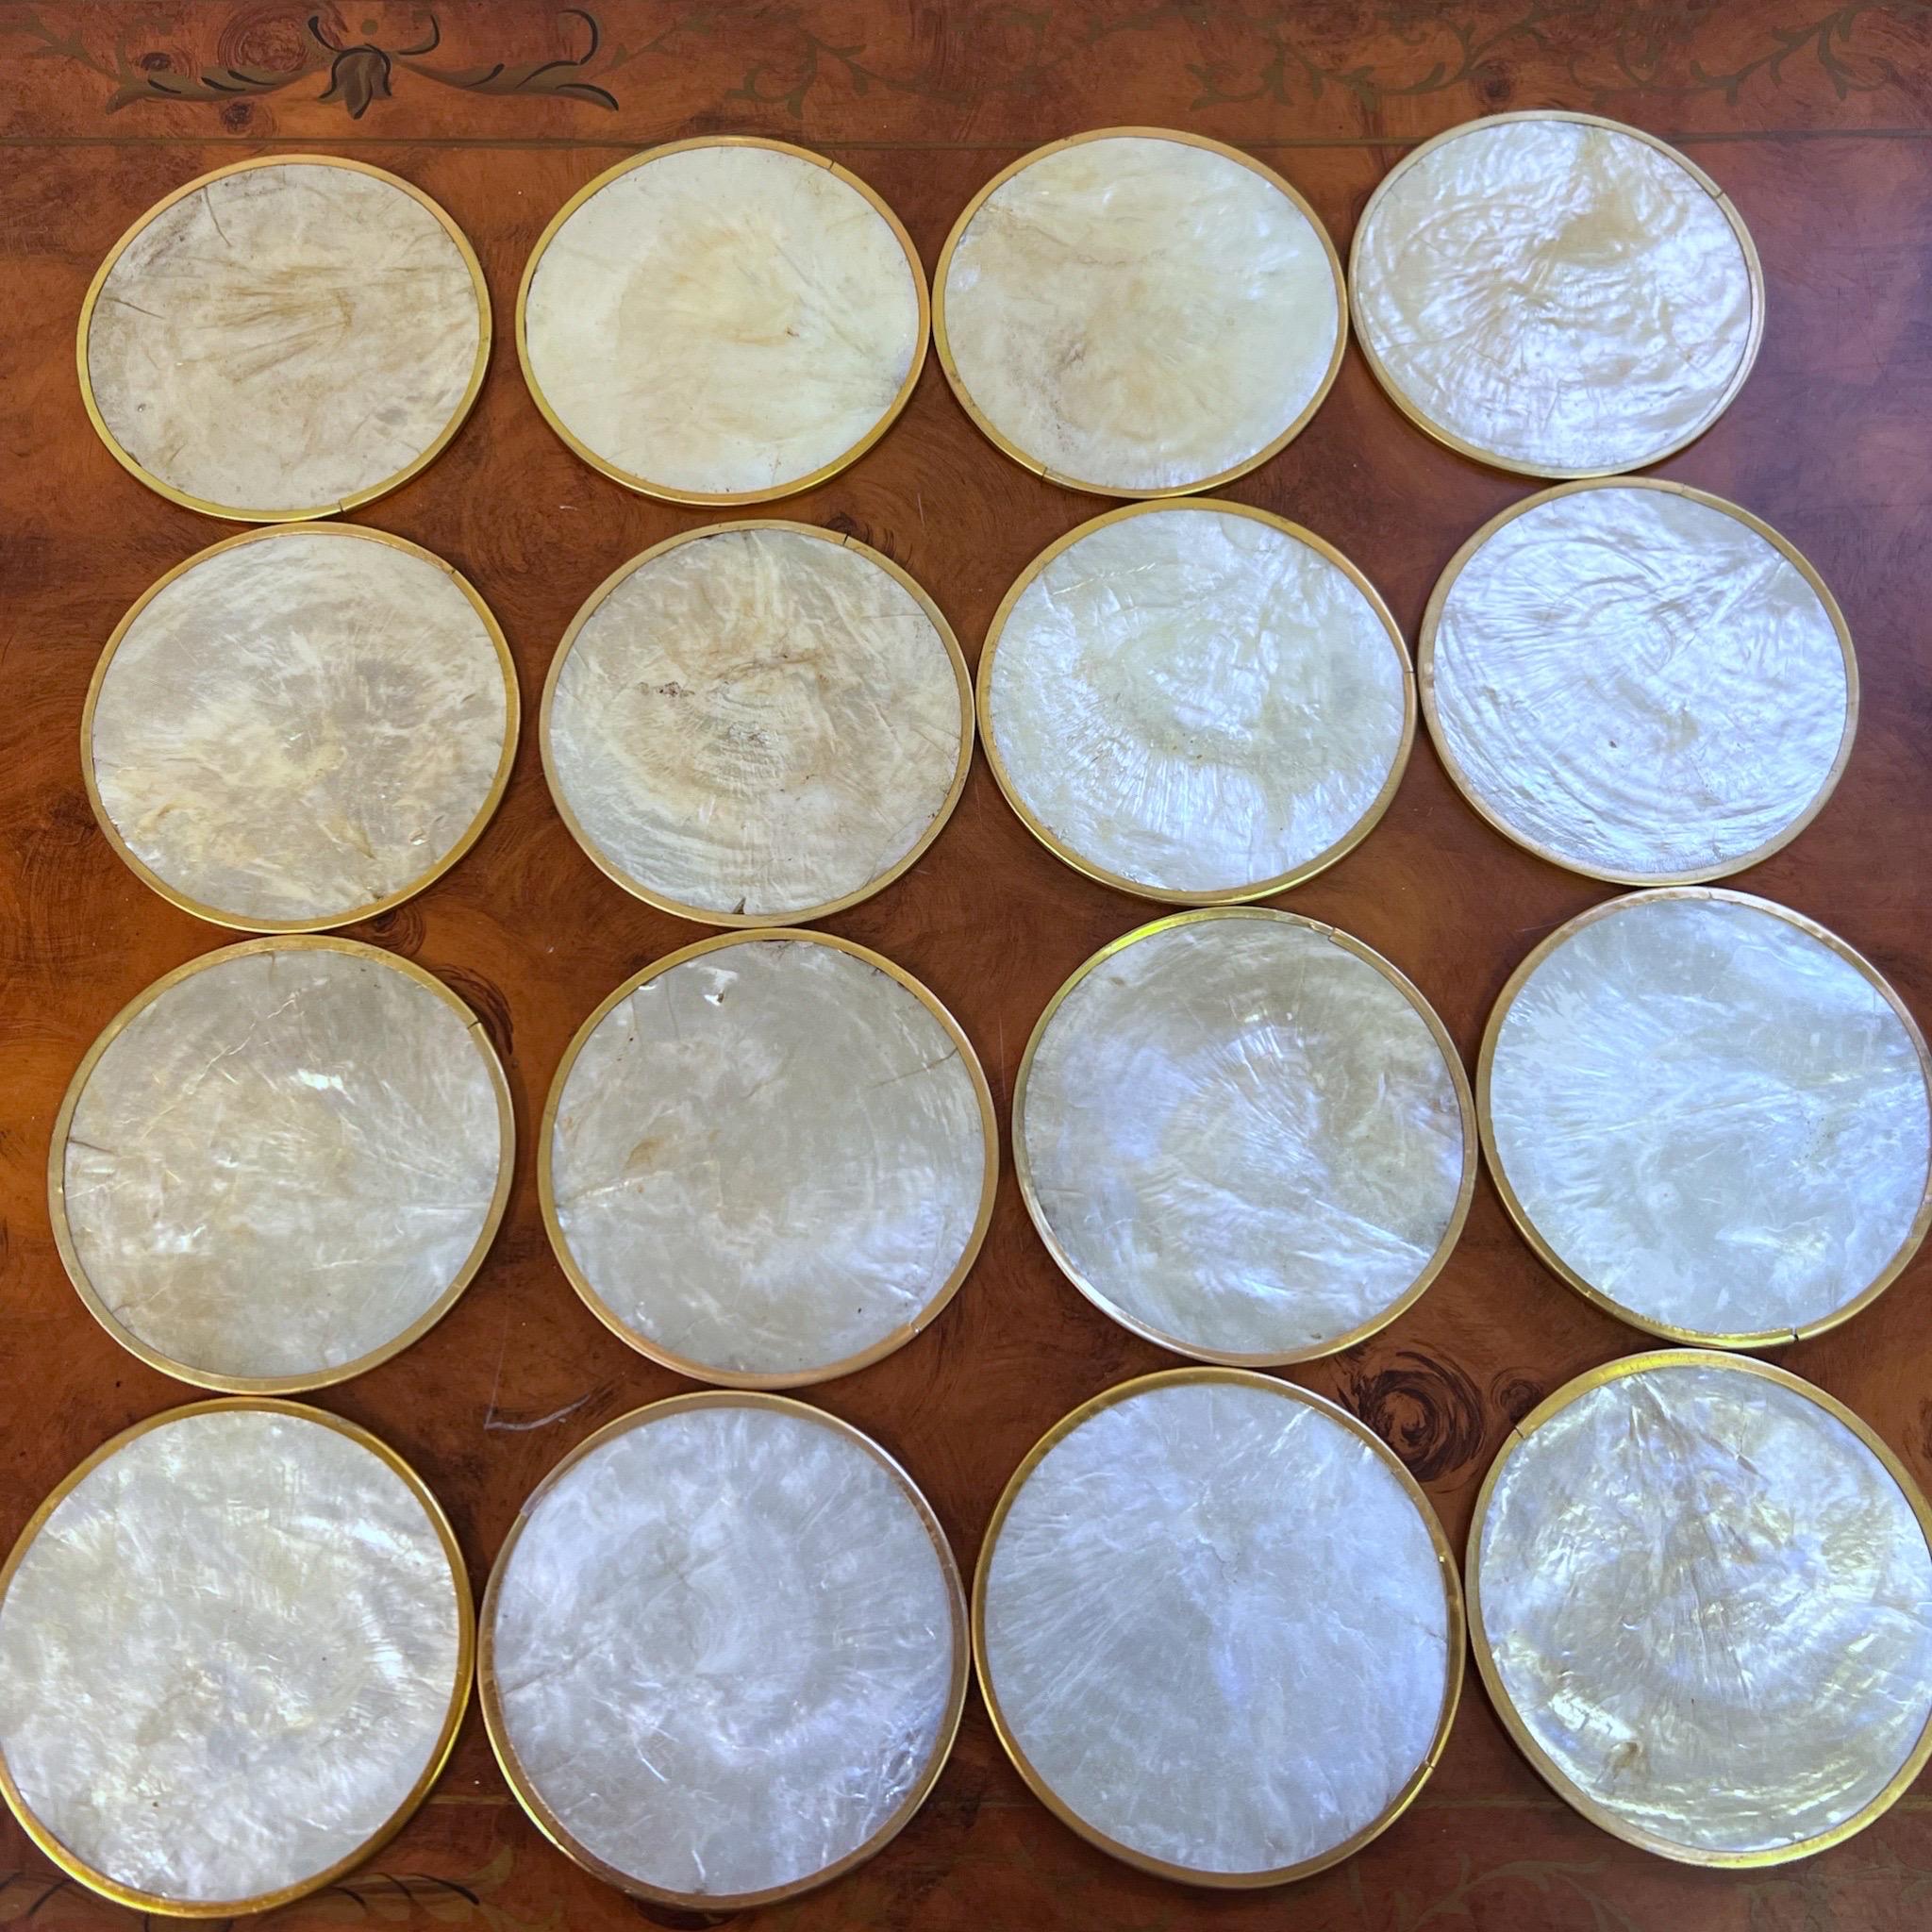 A very lovely set of cork backed capiz shell coasters with brass around the edges.  All in excellent condition.  This is for a set of 16.